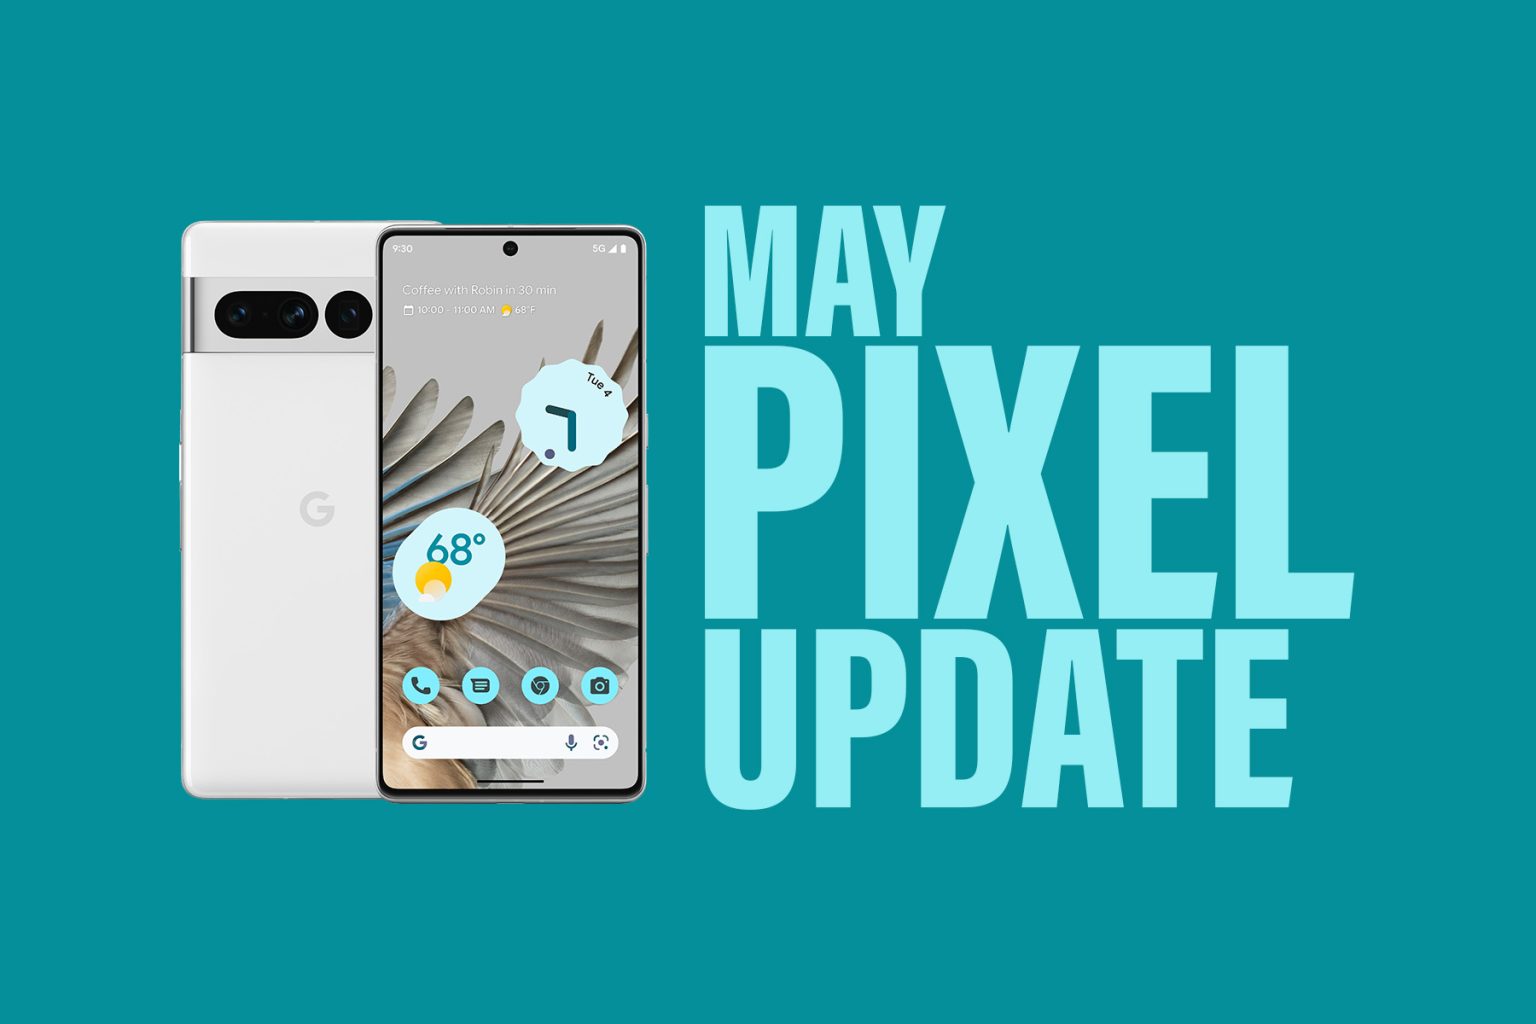 Your Google Pixel Phone's May Update Arrived